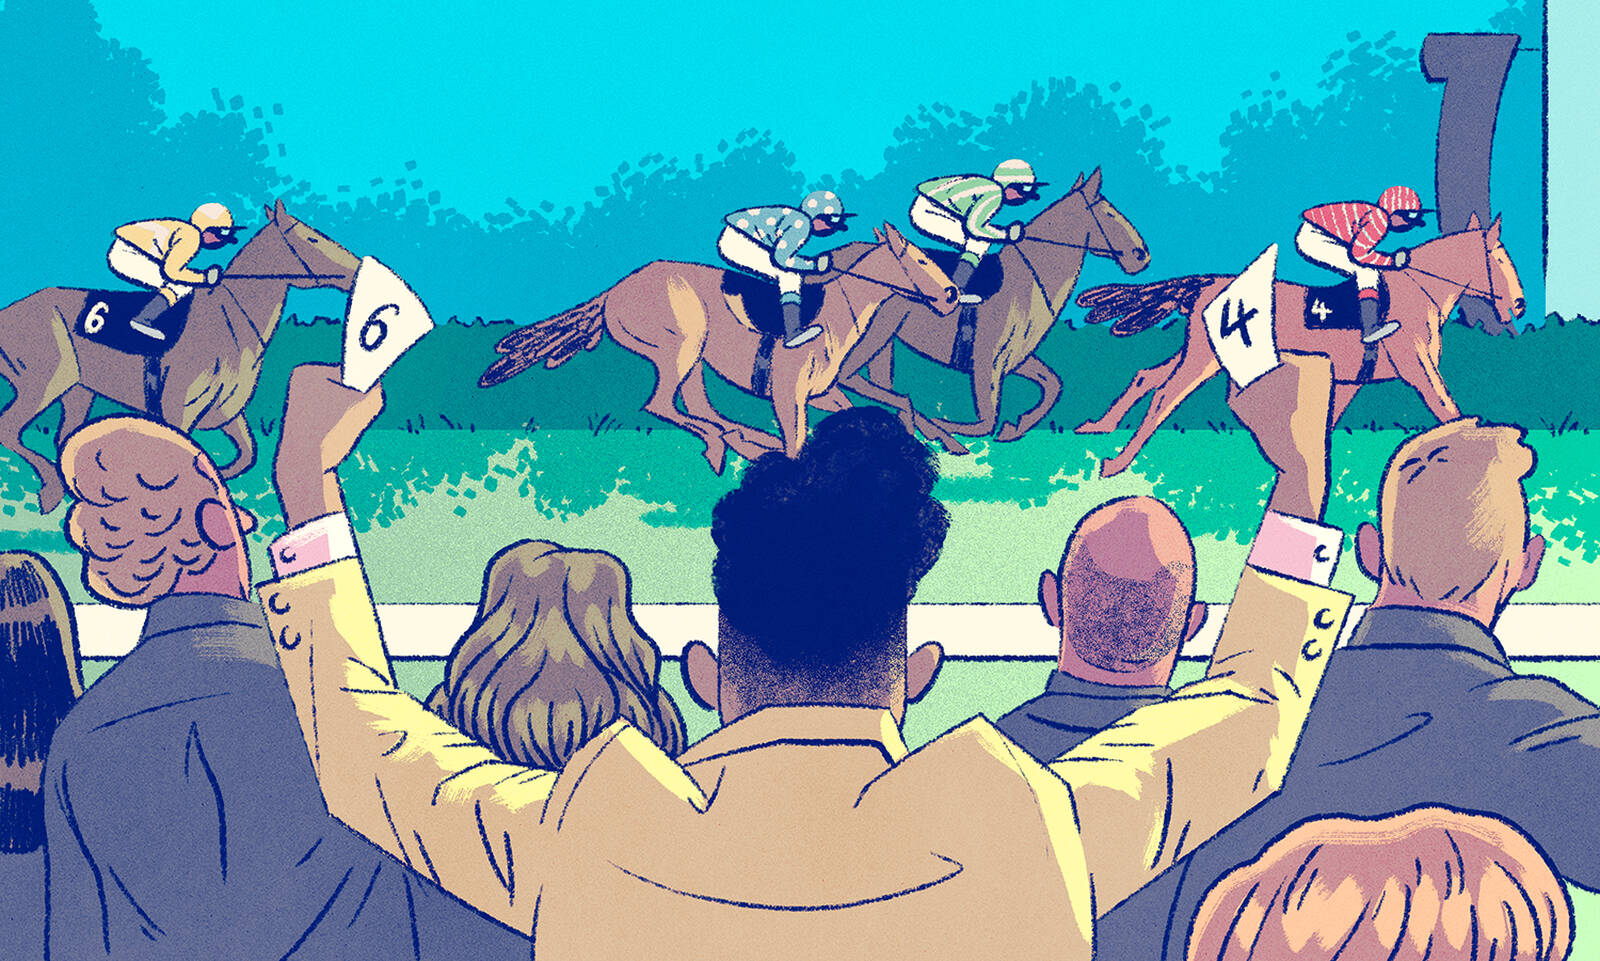 Man cheers on first and last horses in race